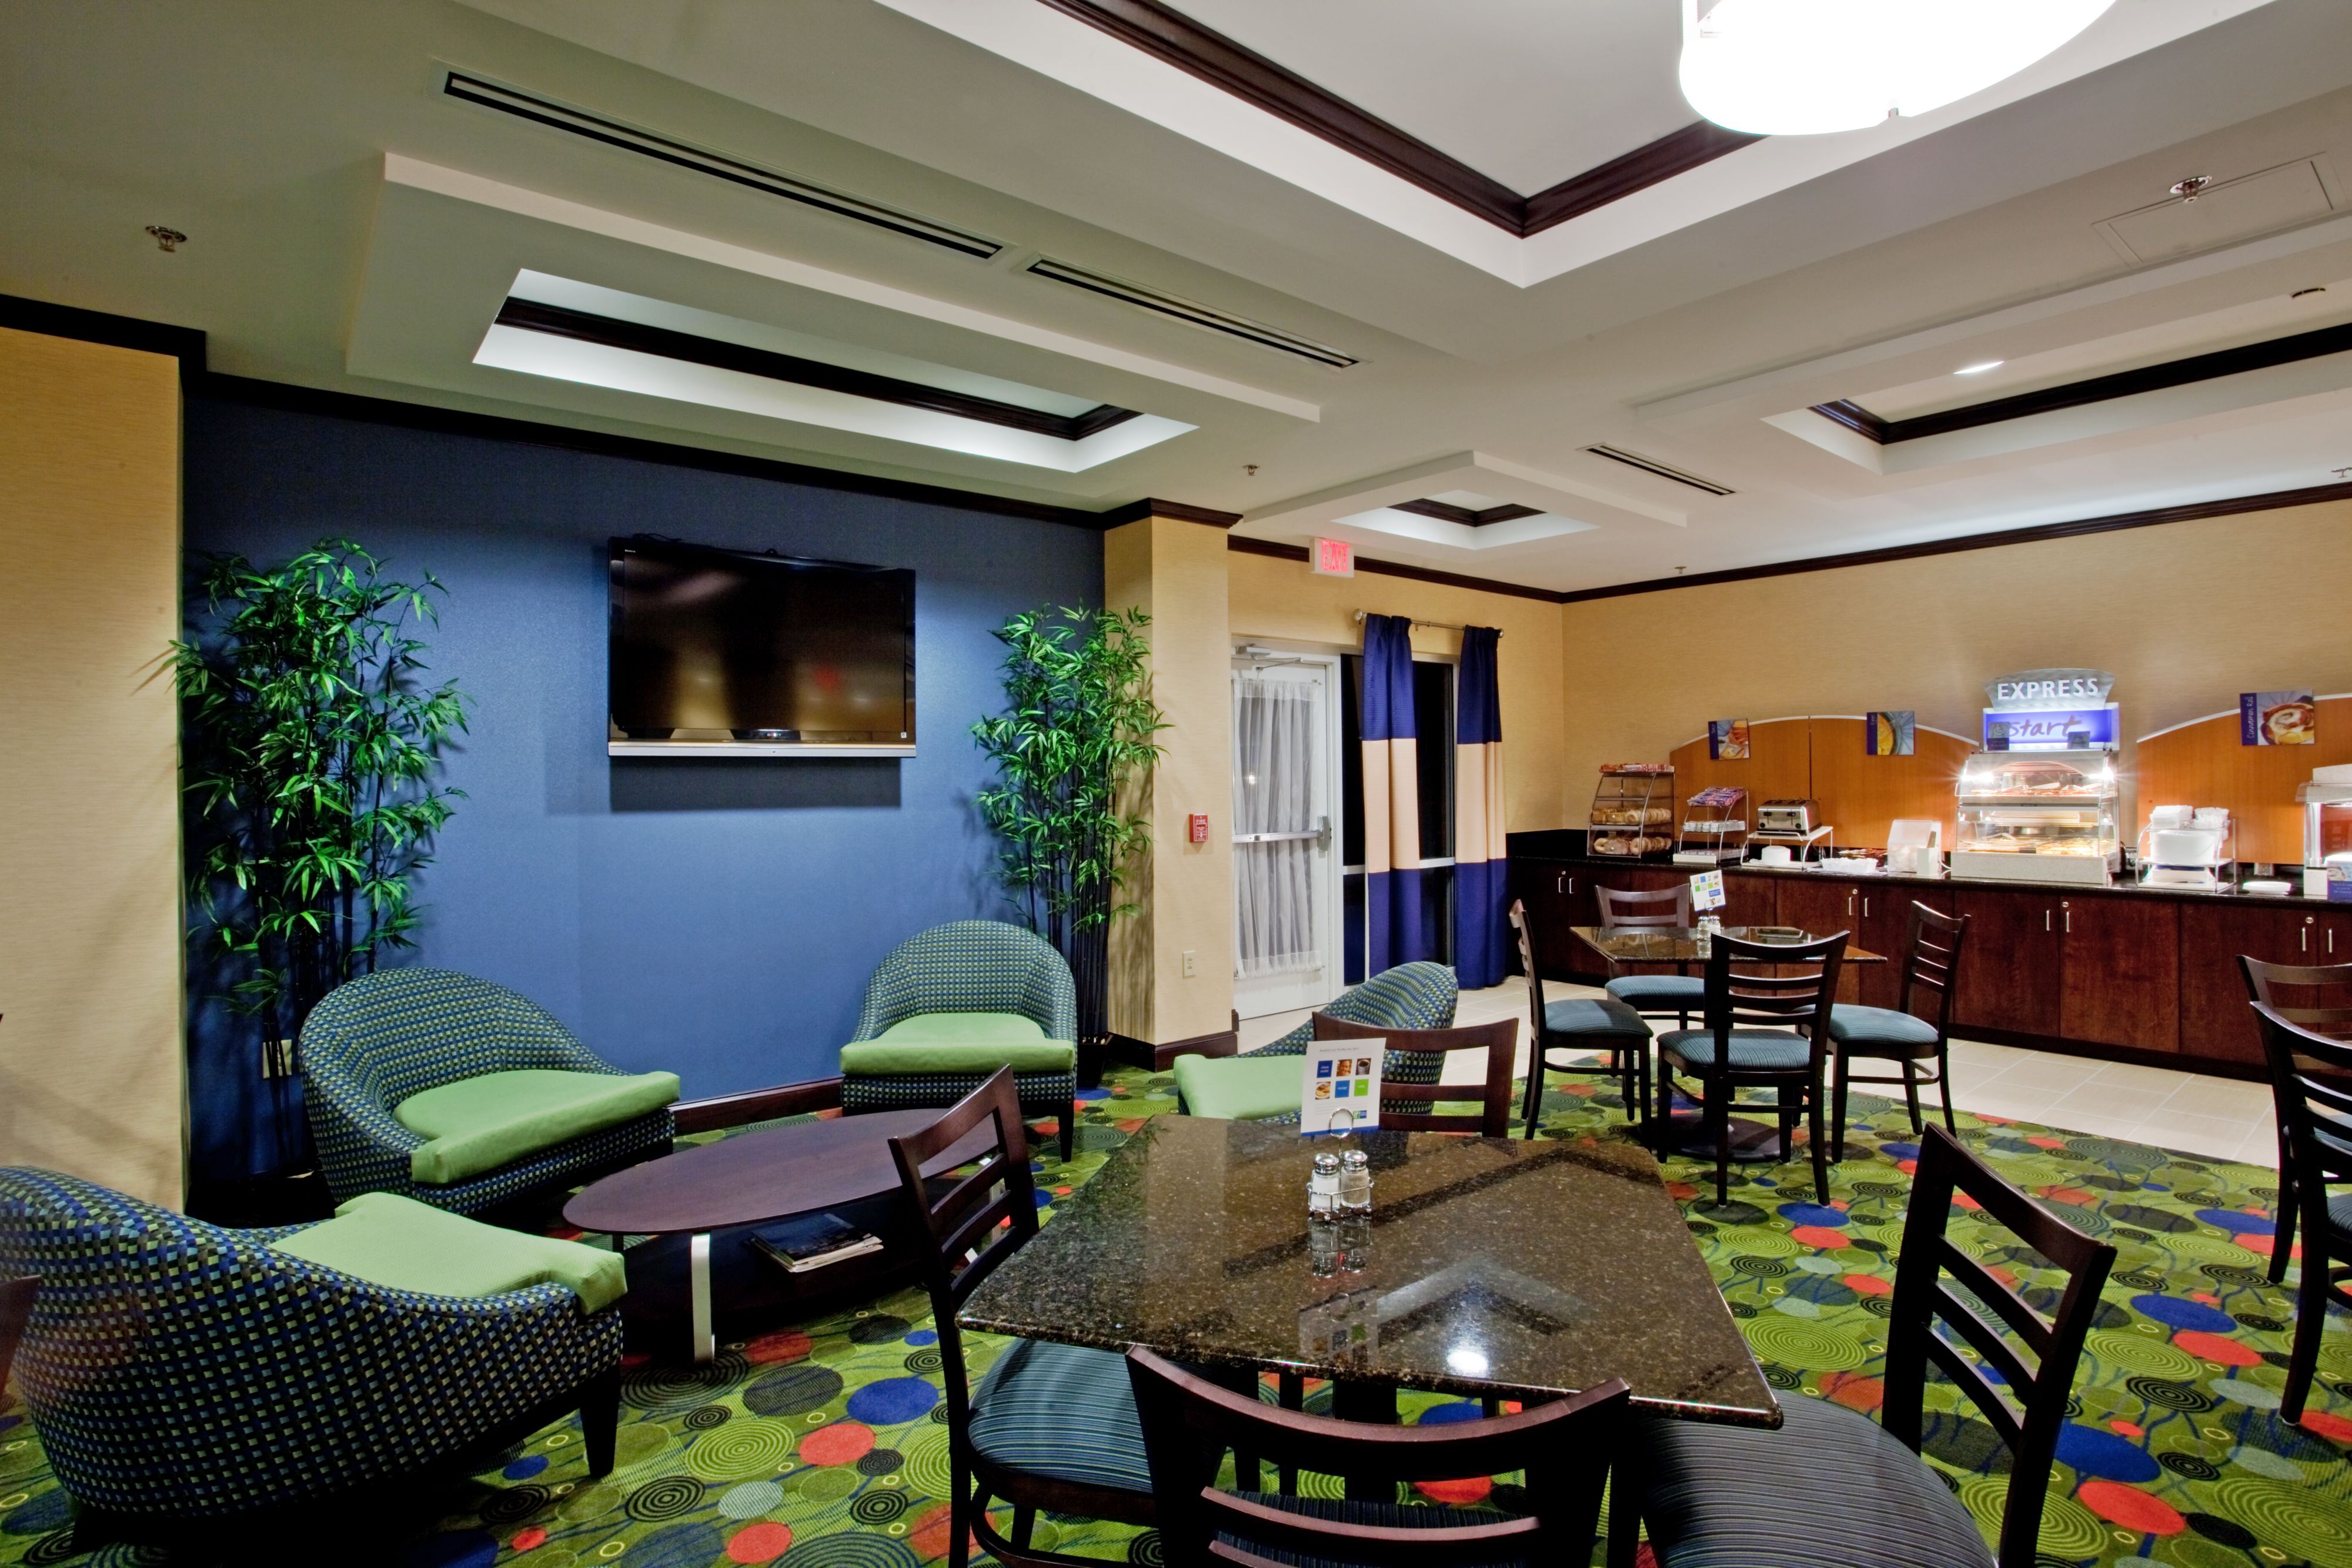 holiday-inn-express-and-suites-raleigh-2533190547-original.jpg